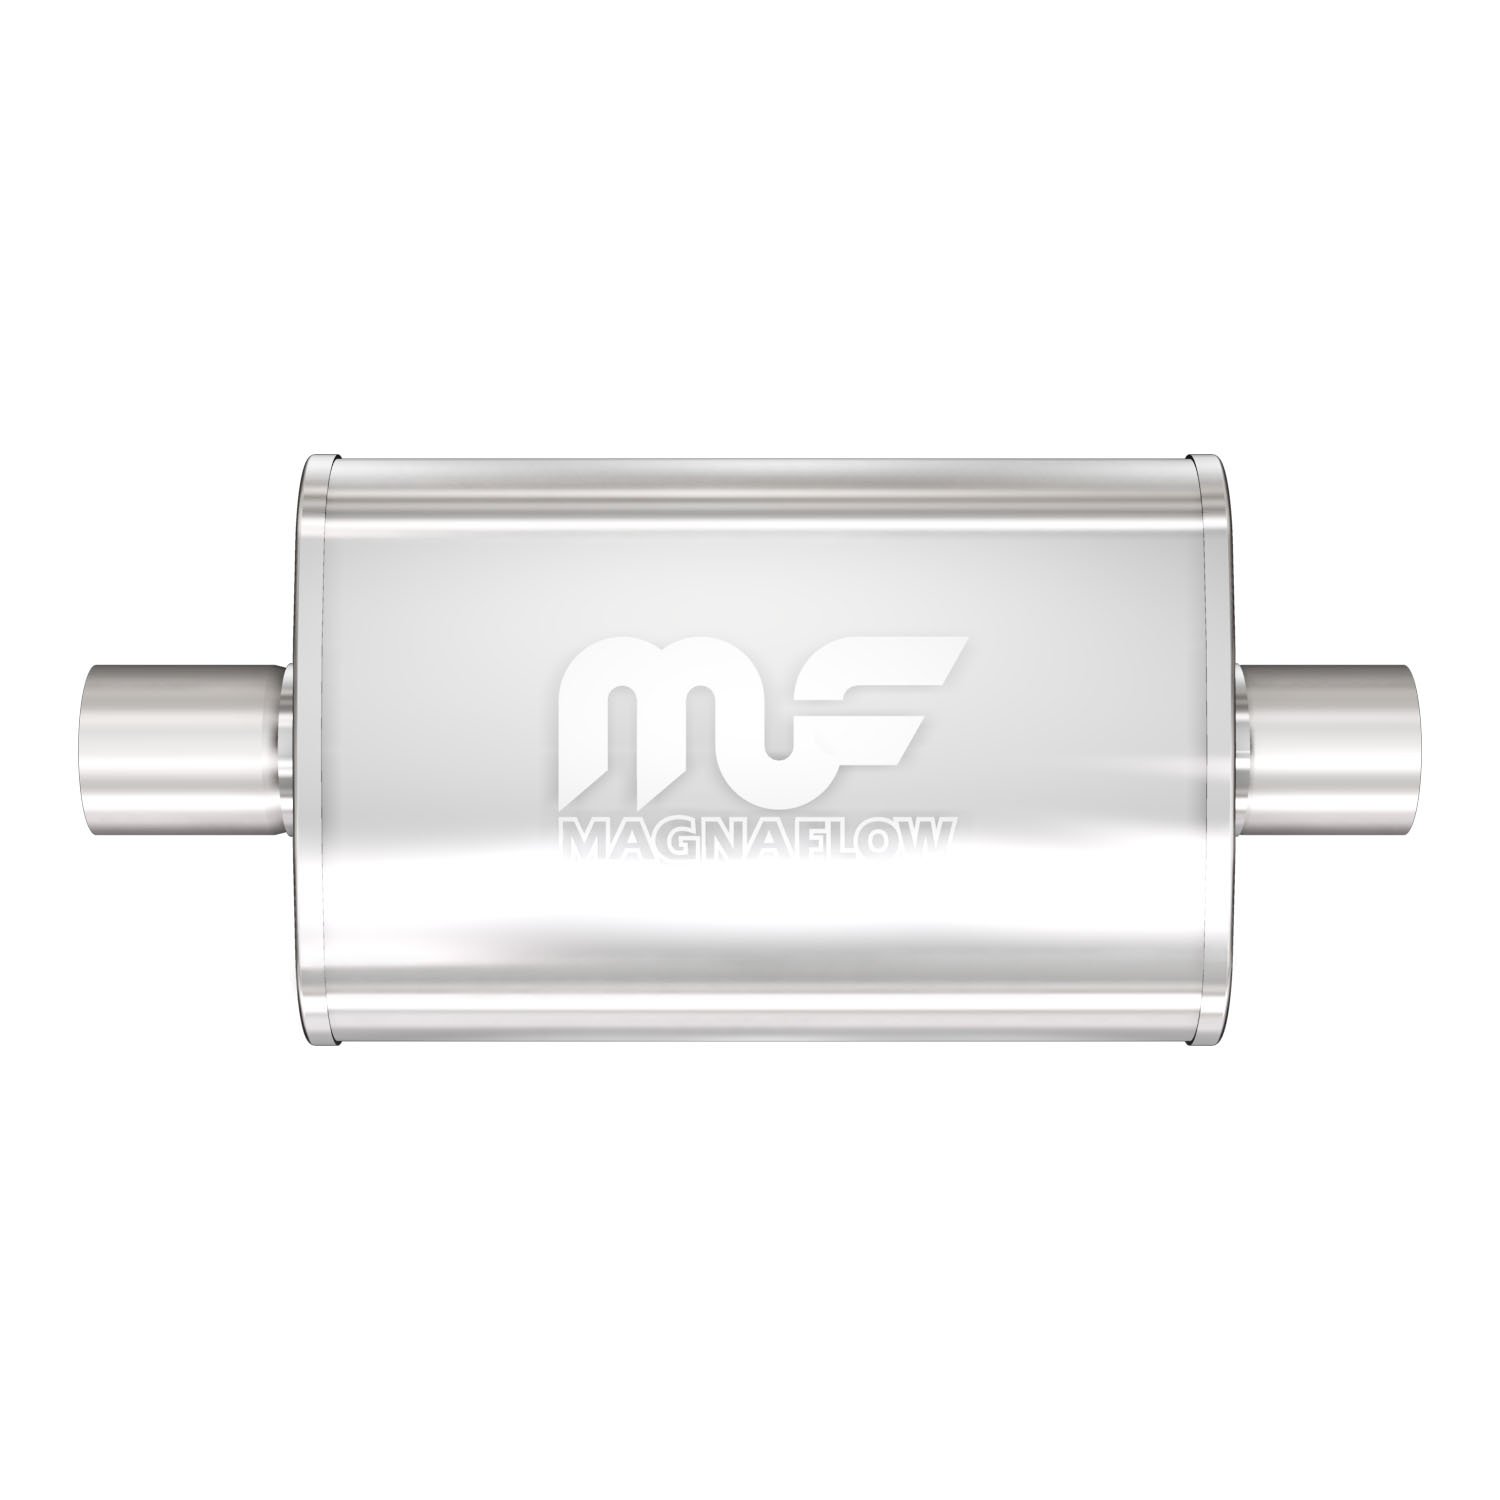 4" x 9" Oval Muffler, Center In/Center Out: 2.5"/2.5", Body Length: 14", Overall Length: 20", Core Size: 2.5" [Brushed Finish]